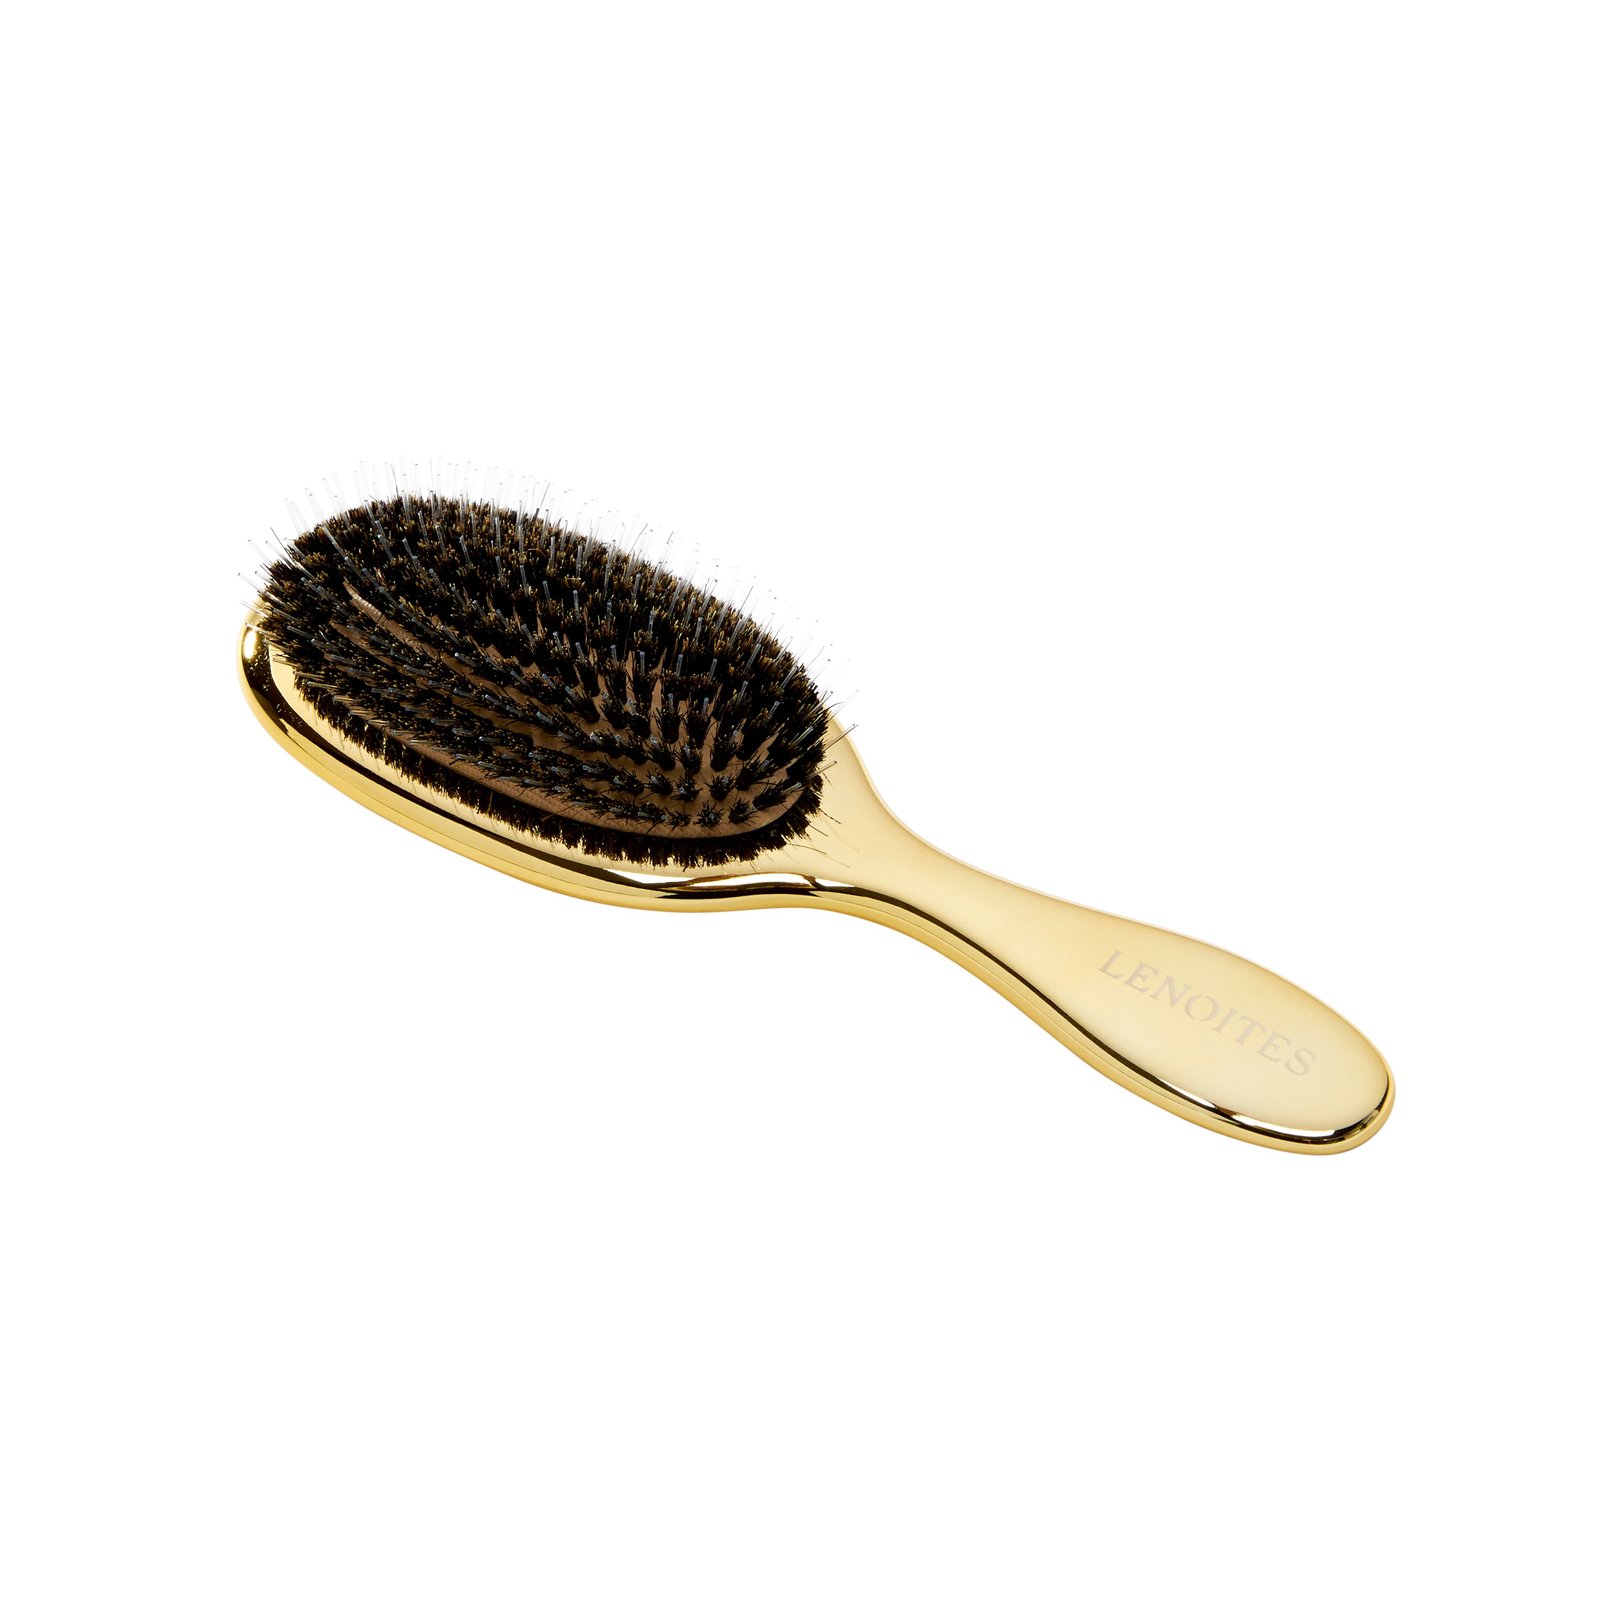 LENOITES Hair Brush Wild Boar With Pouch & Cleaner Tool Gold 1 st